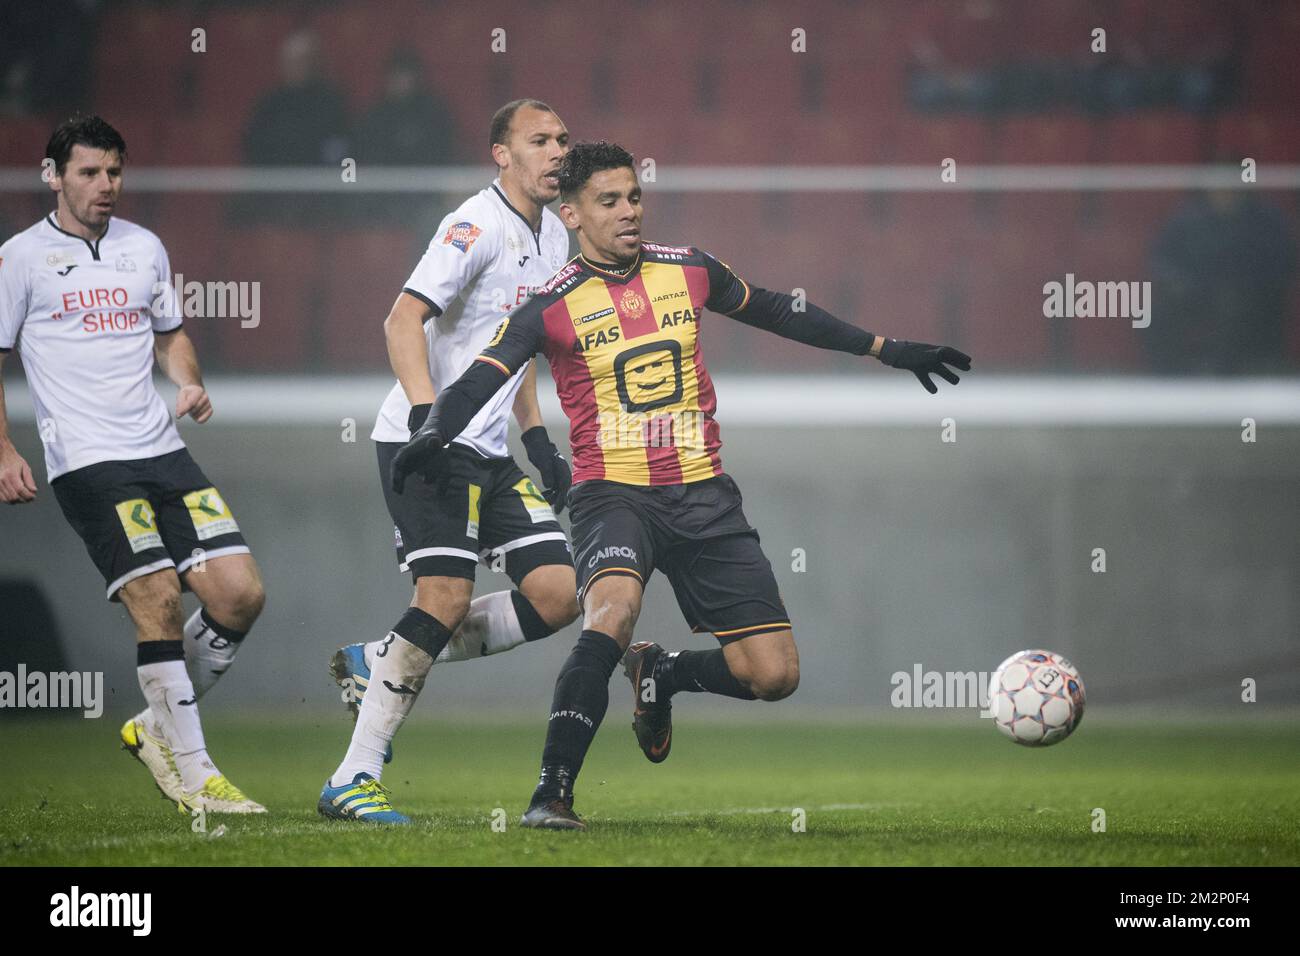 Mechelen's Igor de Camargo pictured in action during a soccer game between KV Mechelen and Roeselare, Friday 18 January 2019 in Mechelen, on the 22nd day of the 'Proximus League' 1B division of the Belgian soccer championship. BELGA PHOTO JASPER JACOBS Stock Photo